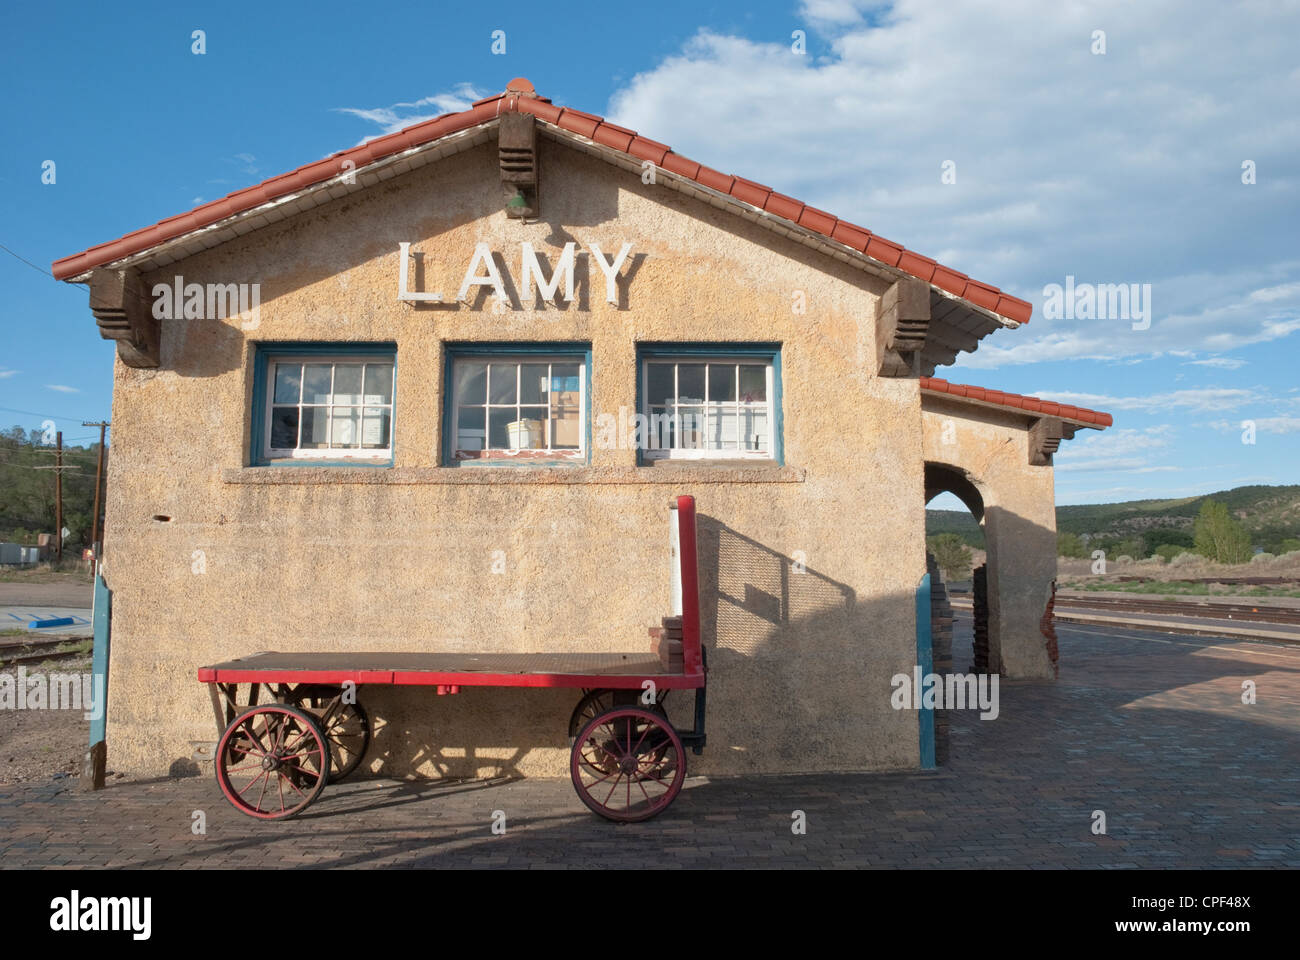 Amtrack still serves the small town of Lamy, New Mexico, just outside of Santa Fe. Stock Photo